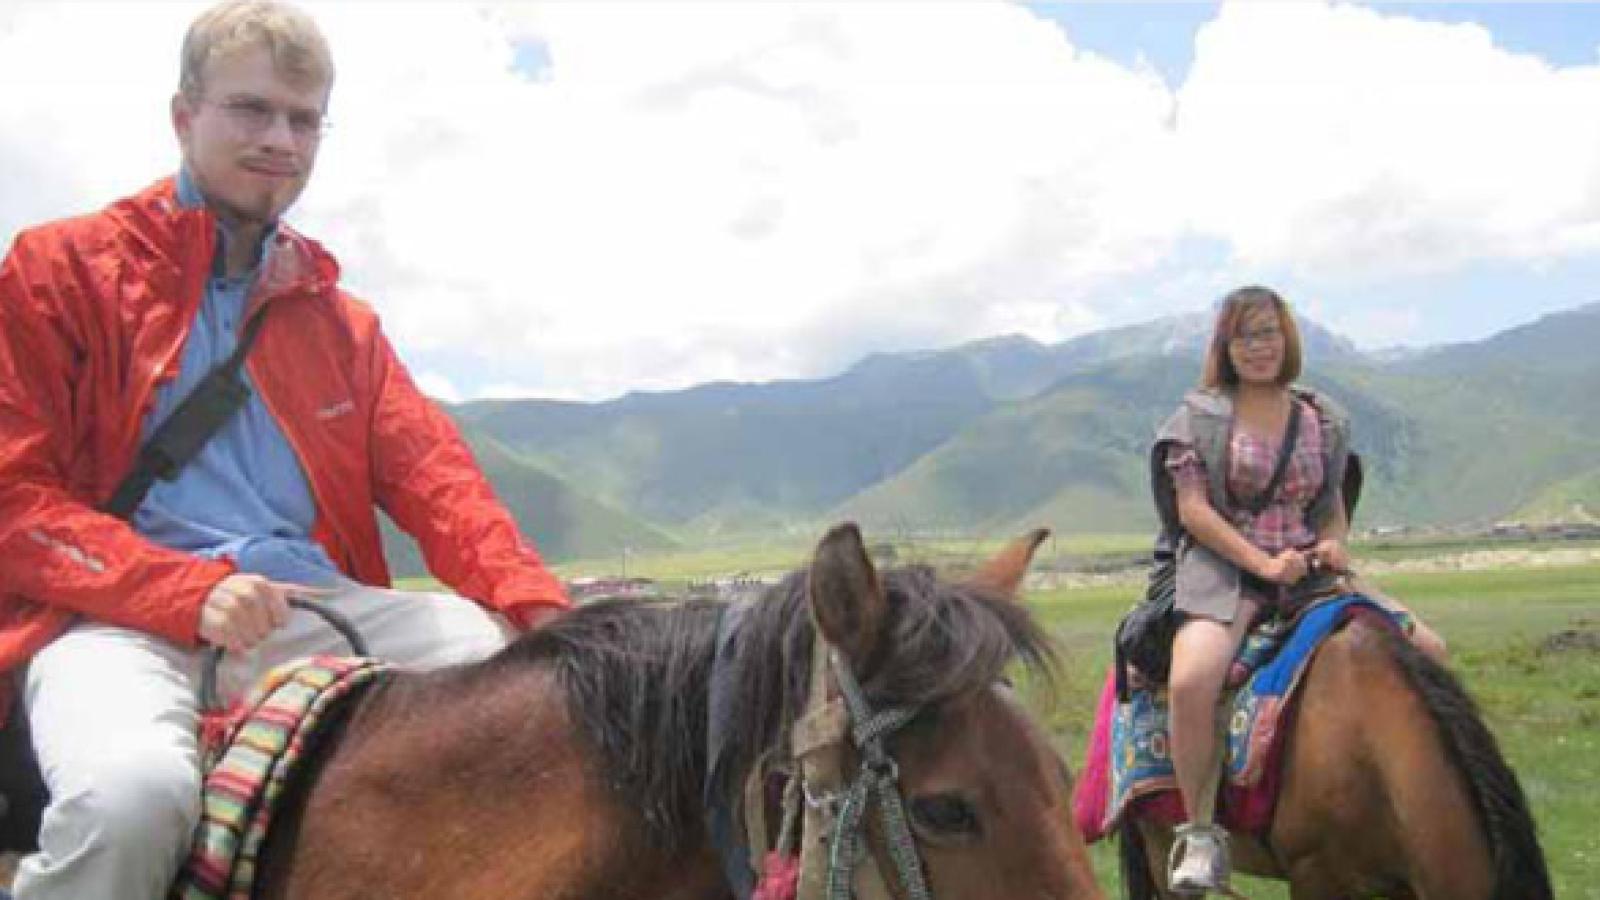 Alexander Long on a horse in China.